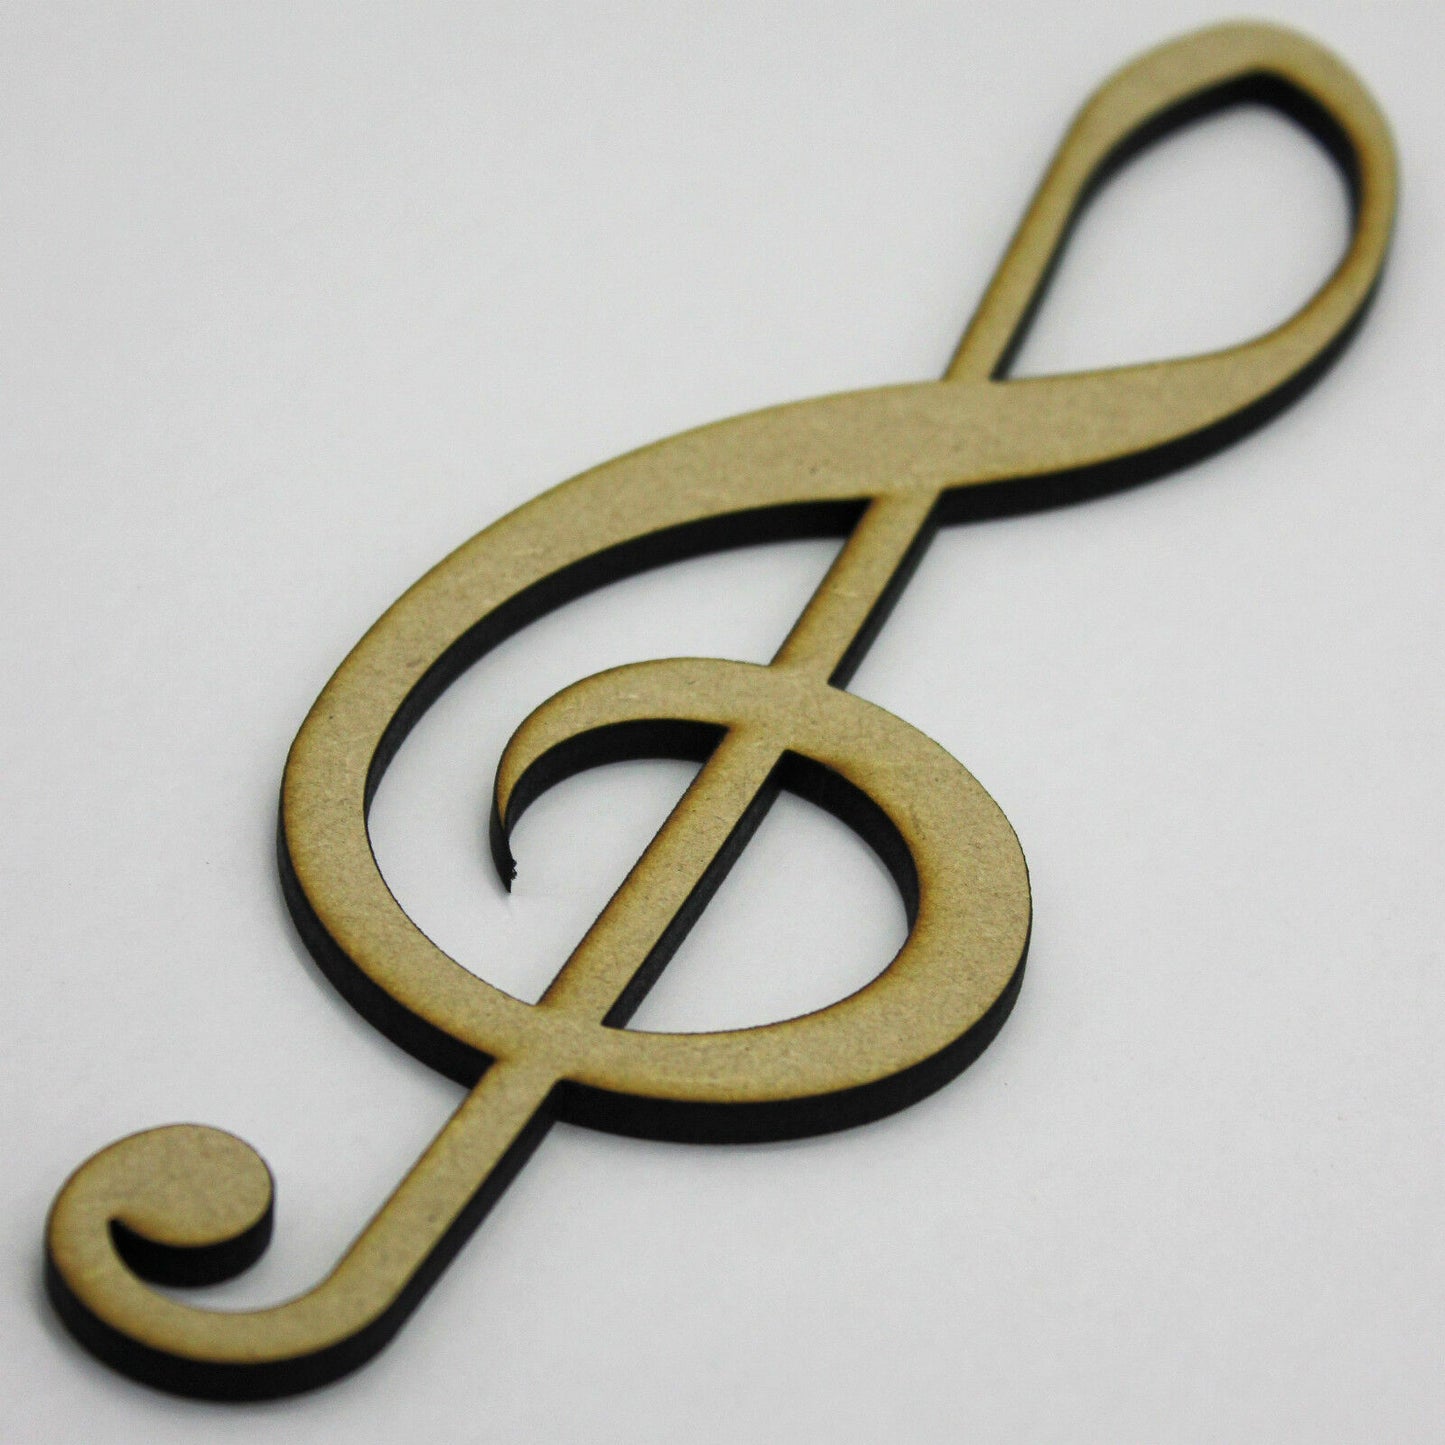 Treble Clef MDF Craft Shape - Various Sizes. Music Decoration, Musician Sign